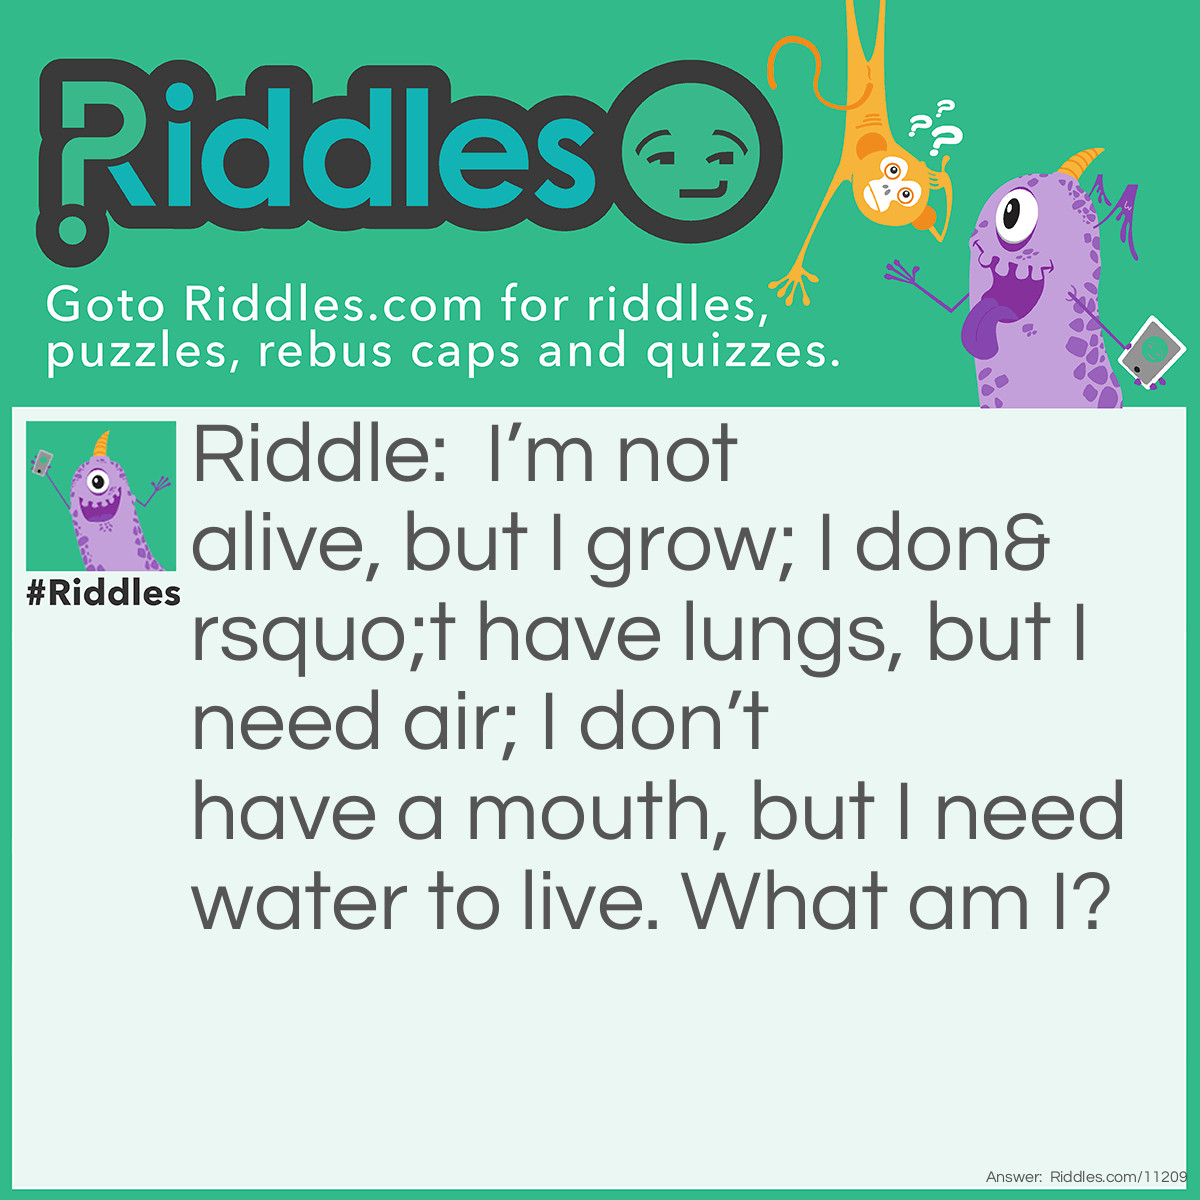 Riddle: I’m not alive, but I grow; I don’t have lungs, but I need air; I don’t have a mouth, but I need water to live. What am I? Answer: Fire! cause when fire gets the water it doesn't stop it actually grows more when you put you need cold water or ice to cool down.